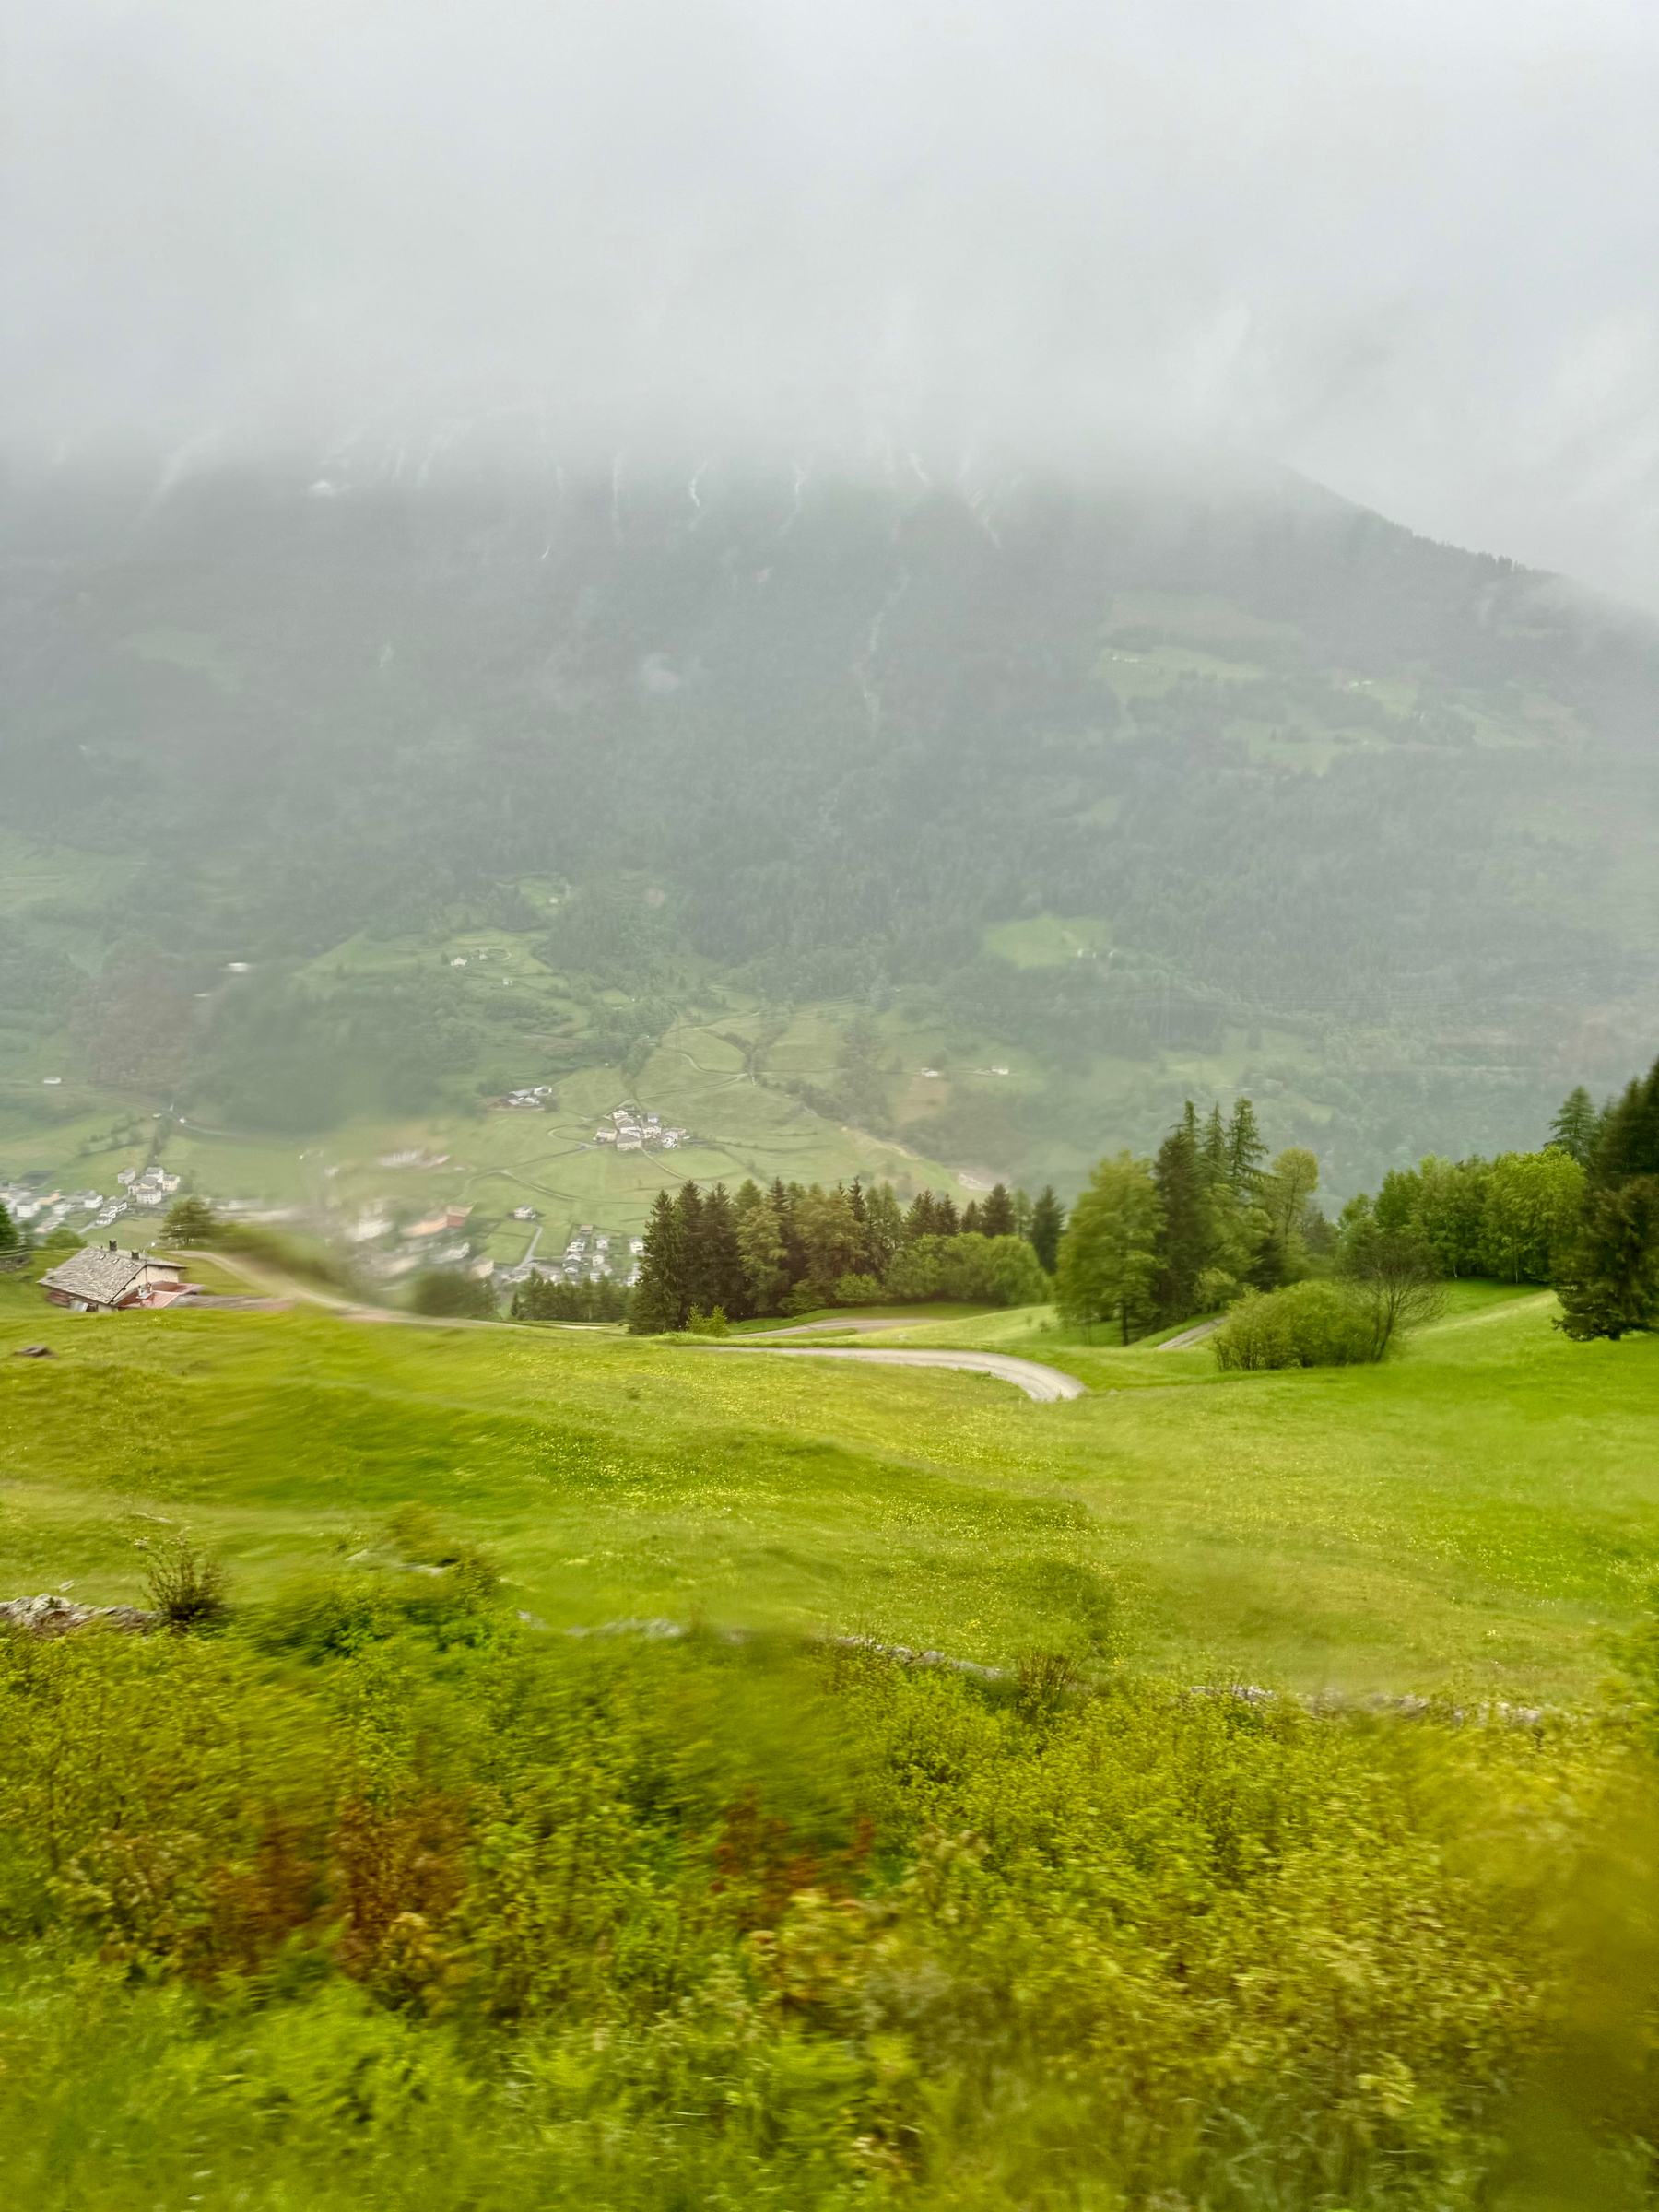 A scenic landscape featuring lush green fields, winding paths, and a few scattered houses, all set against a backdrop of forested hills partially obscured by fog and mist.